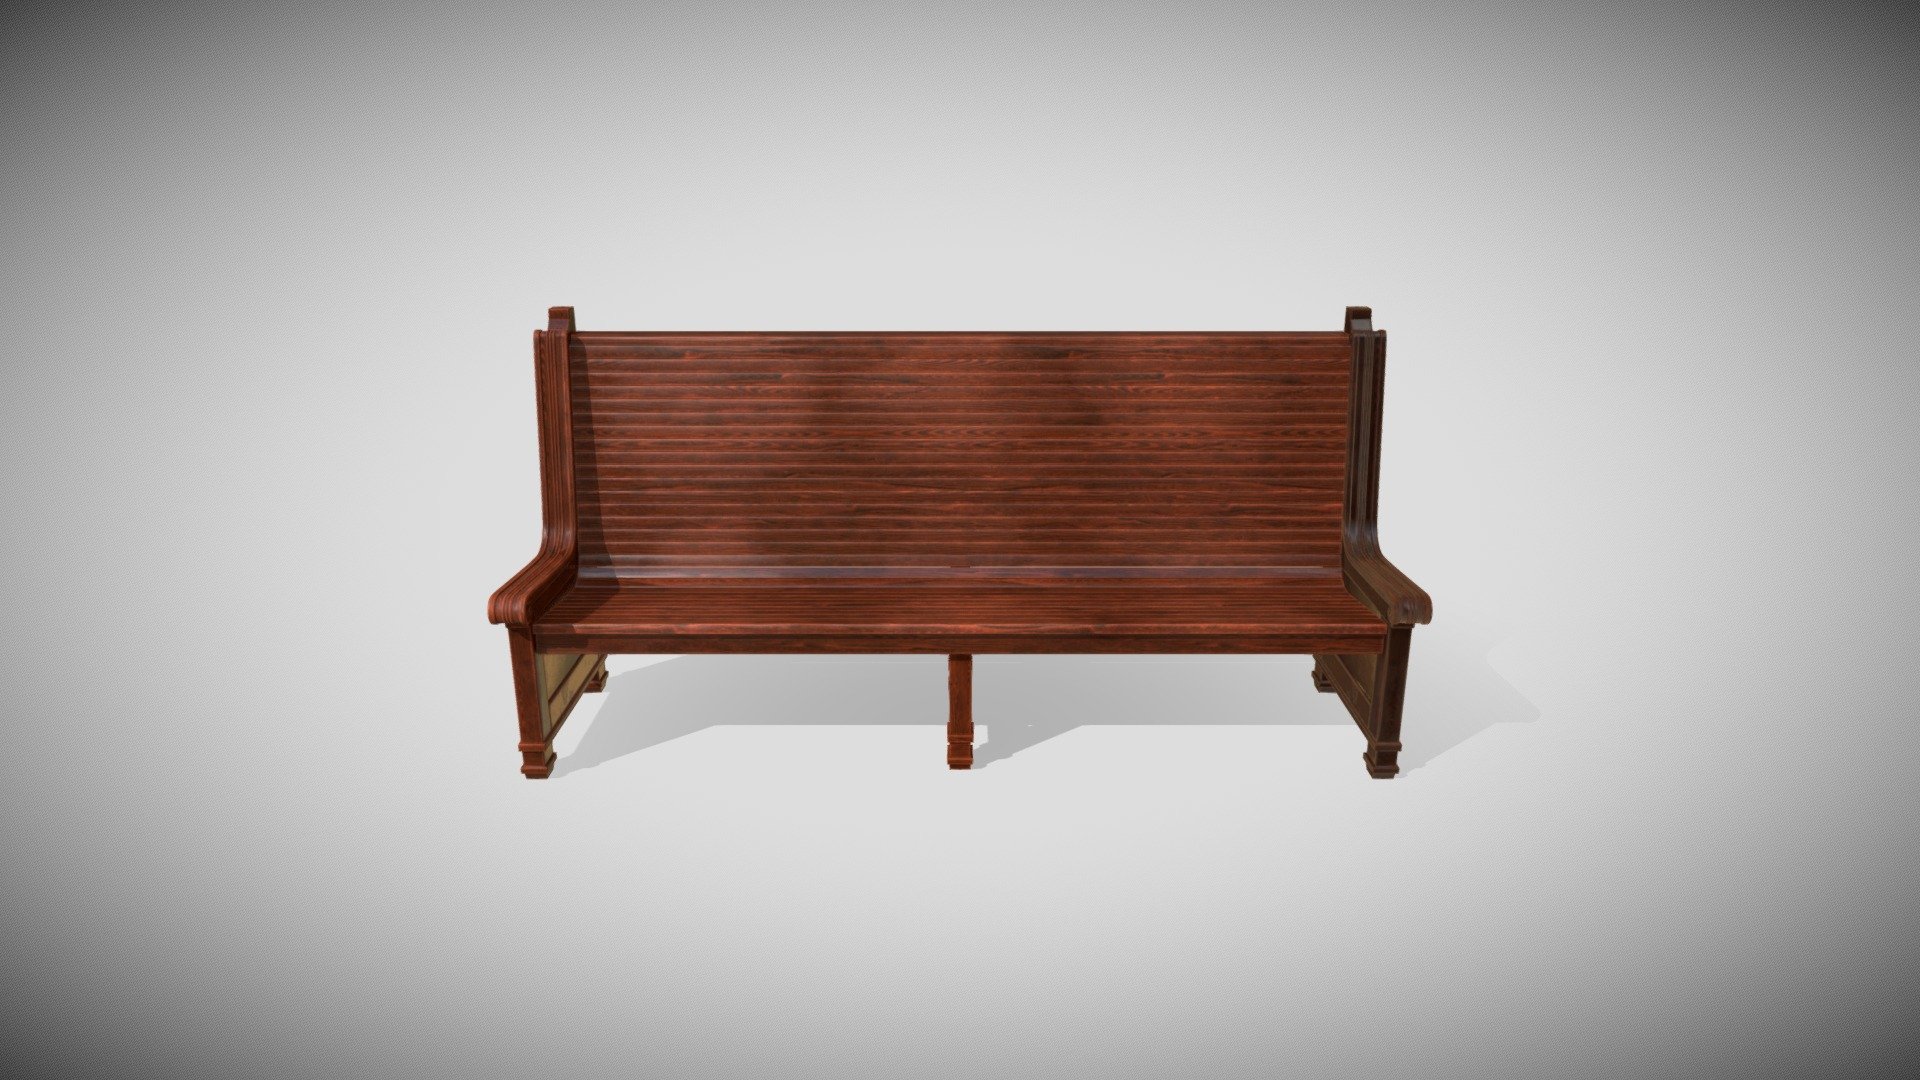 Trainstation bench inspired by the 1900's travelling images. Base model was made in Blender, and textures were made with Substance Painter.

This model was created with high quality rendered images in mind, such as arch-viz projects, but can also be used for games or other projects. If you intend to use it in a game engine, please be advised that you'll need to bring the polycount of the handrest part down because it has a lot of edge loops to control the curved shape.

Textures that come with this model are: base_color, roughness, and normal map (openGL). All in 4K resolution, so you can scale them down safely in any photo editing software, if you need lower resolution. For better resolution of the textures, this composition uses 3 different UV sets and materials. If using with a game engine, it is recomended that you channel pack the textures for saving memory usage 3d model